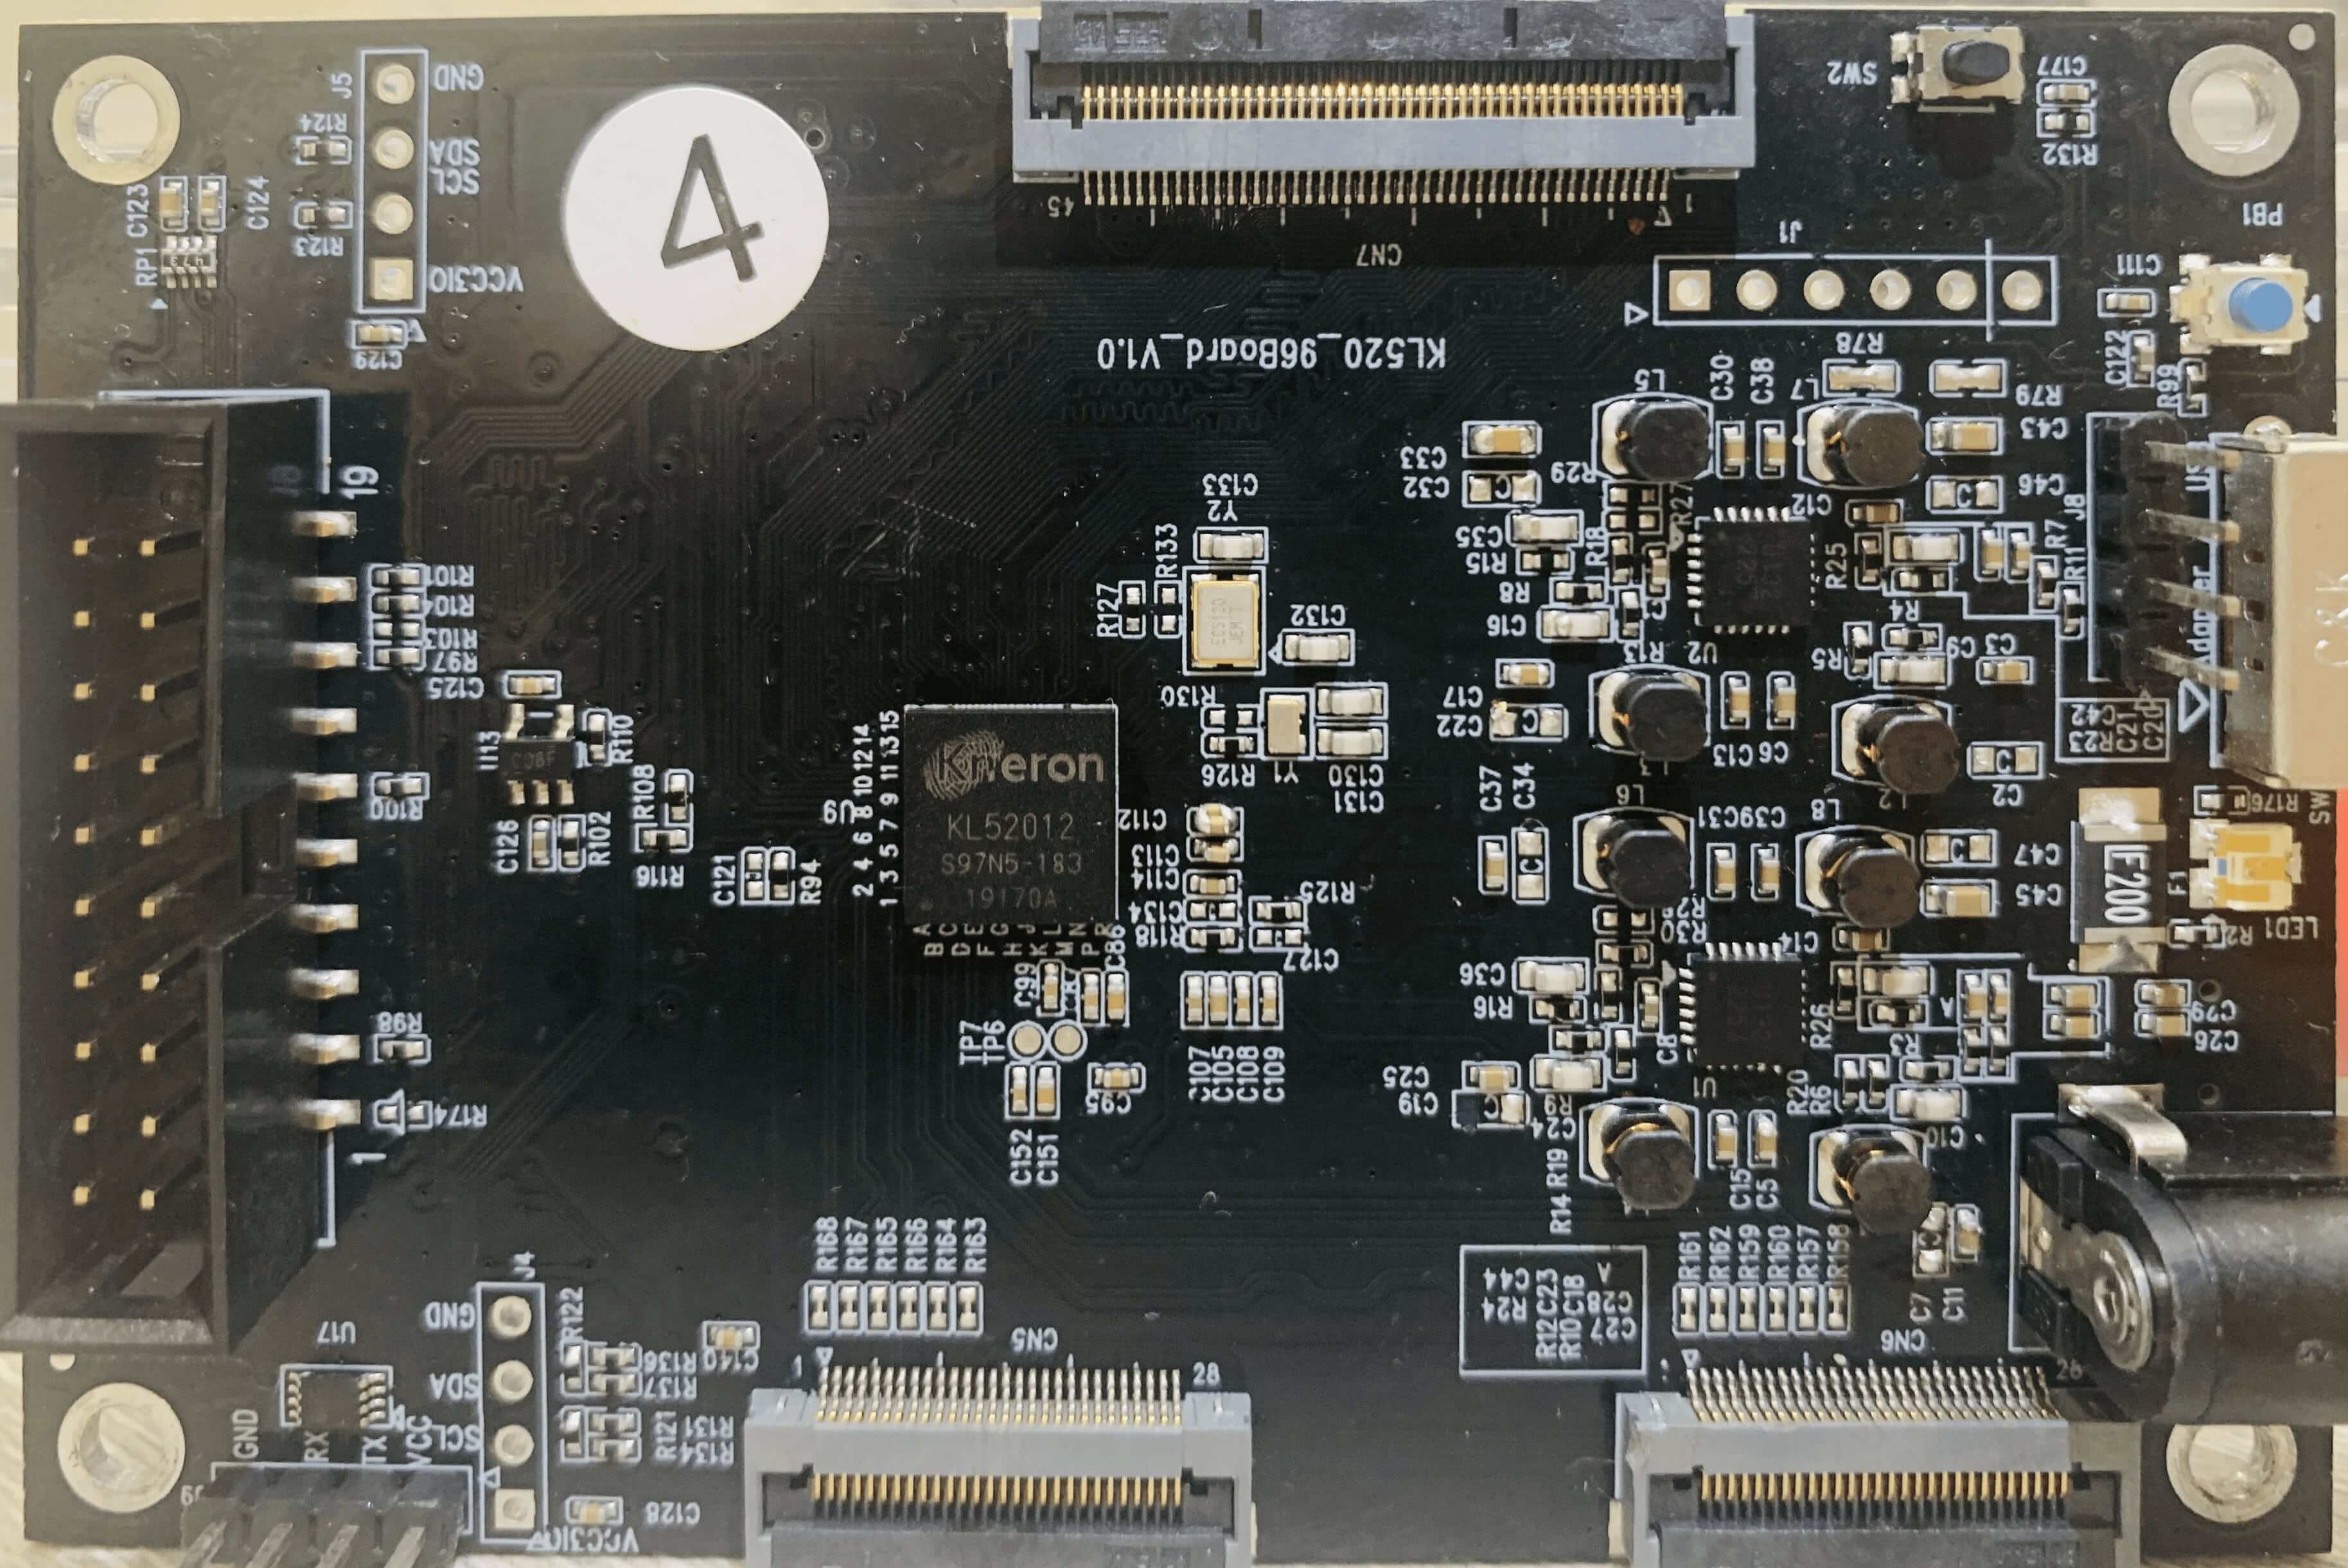 Kneron KL520 SoC on demo board. The KL520 Neural Processor Unit (NPU) was listed by EE Times as one of the top ten chipsets for edge AI applications